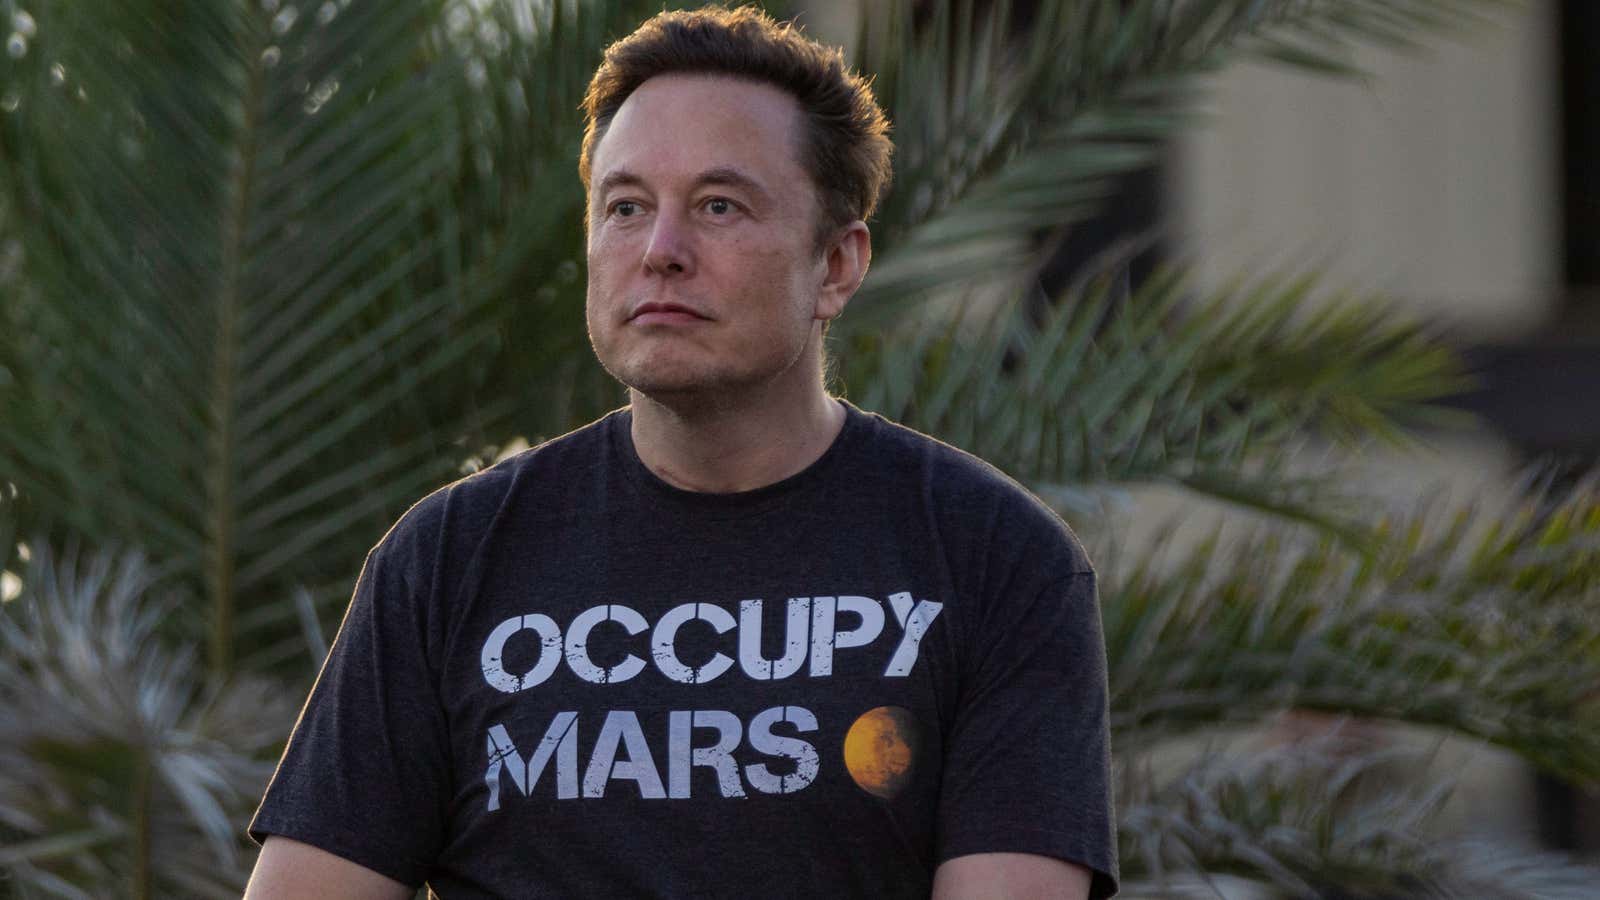 Elon Musk says media bias means he can’t get a fair trial in San Francisco